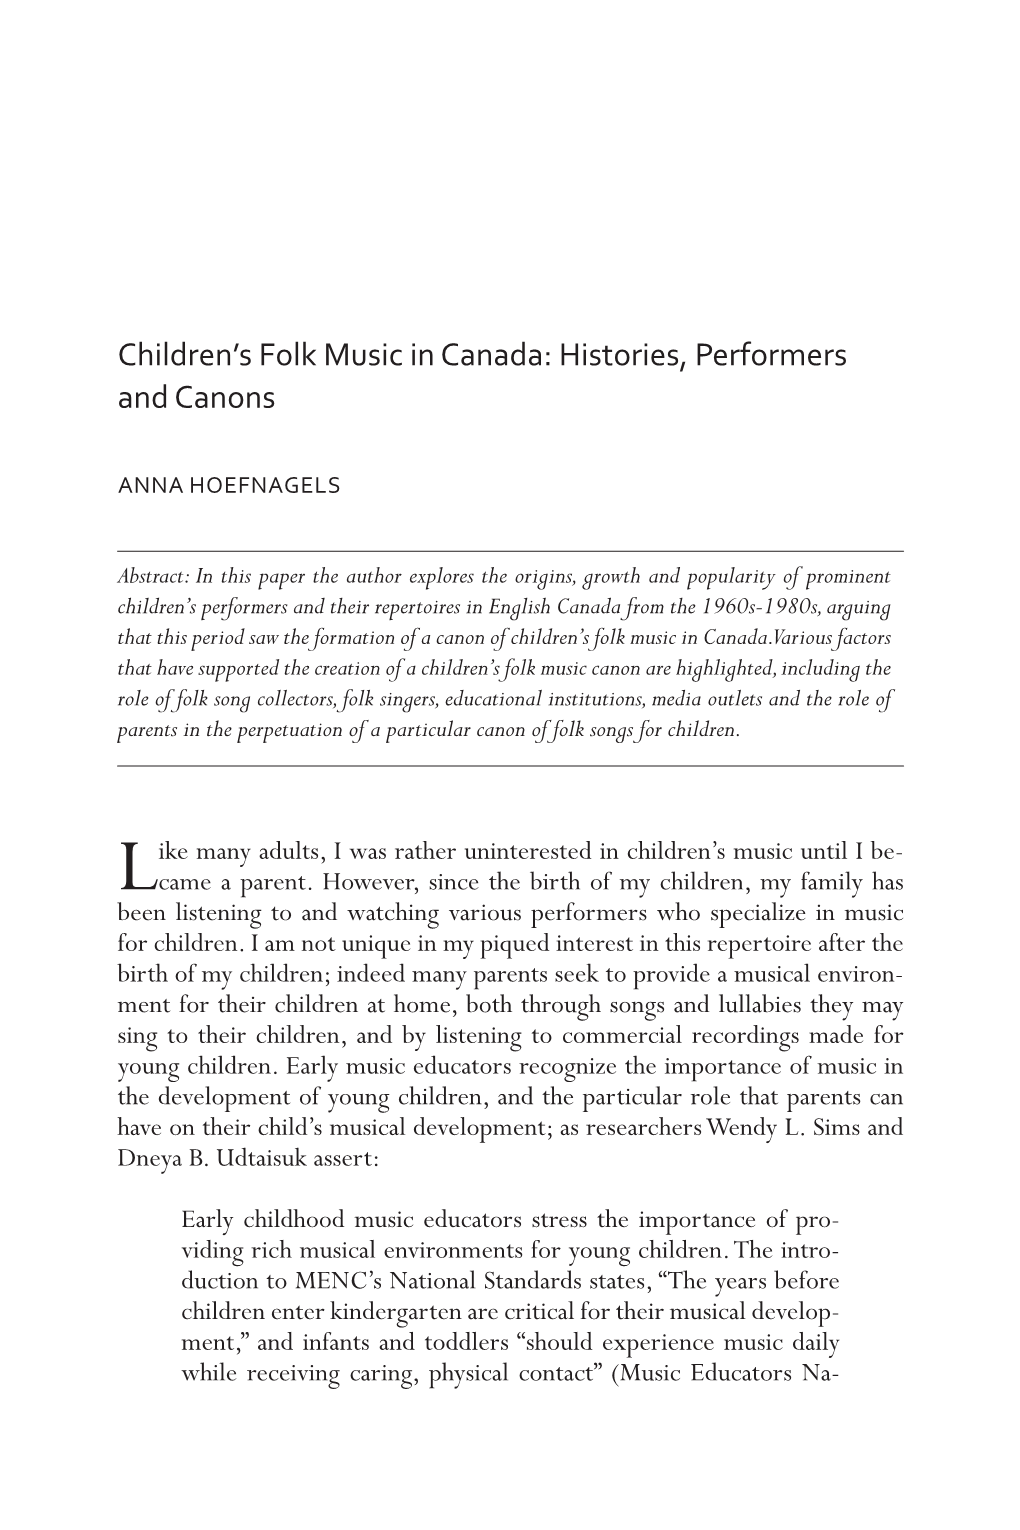 Children's Folk Music in Canada: Histories, Performers and Canons